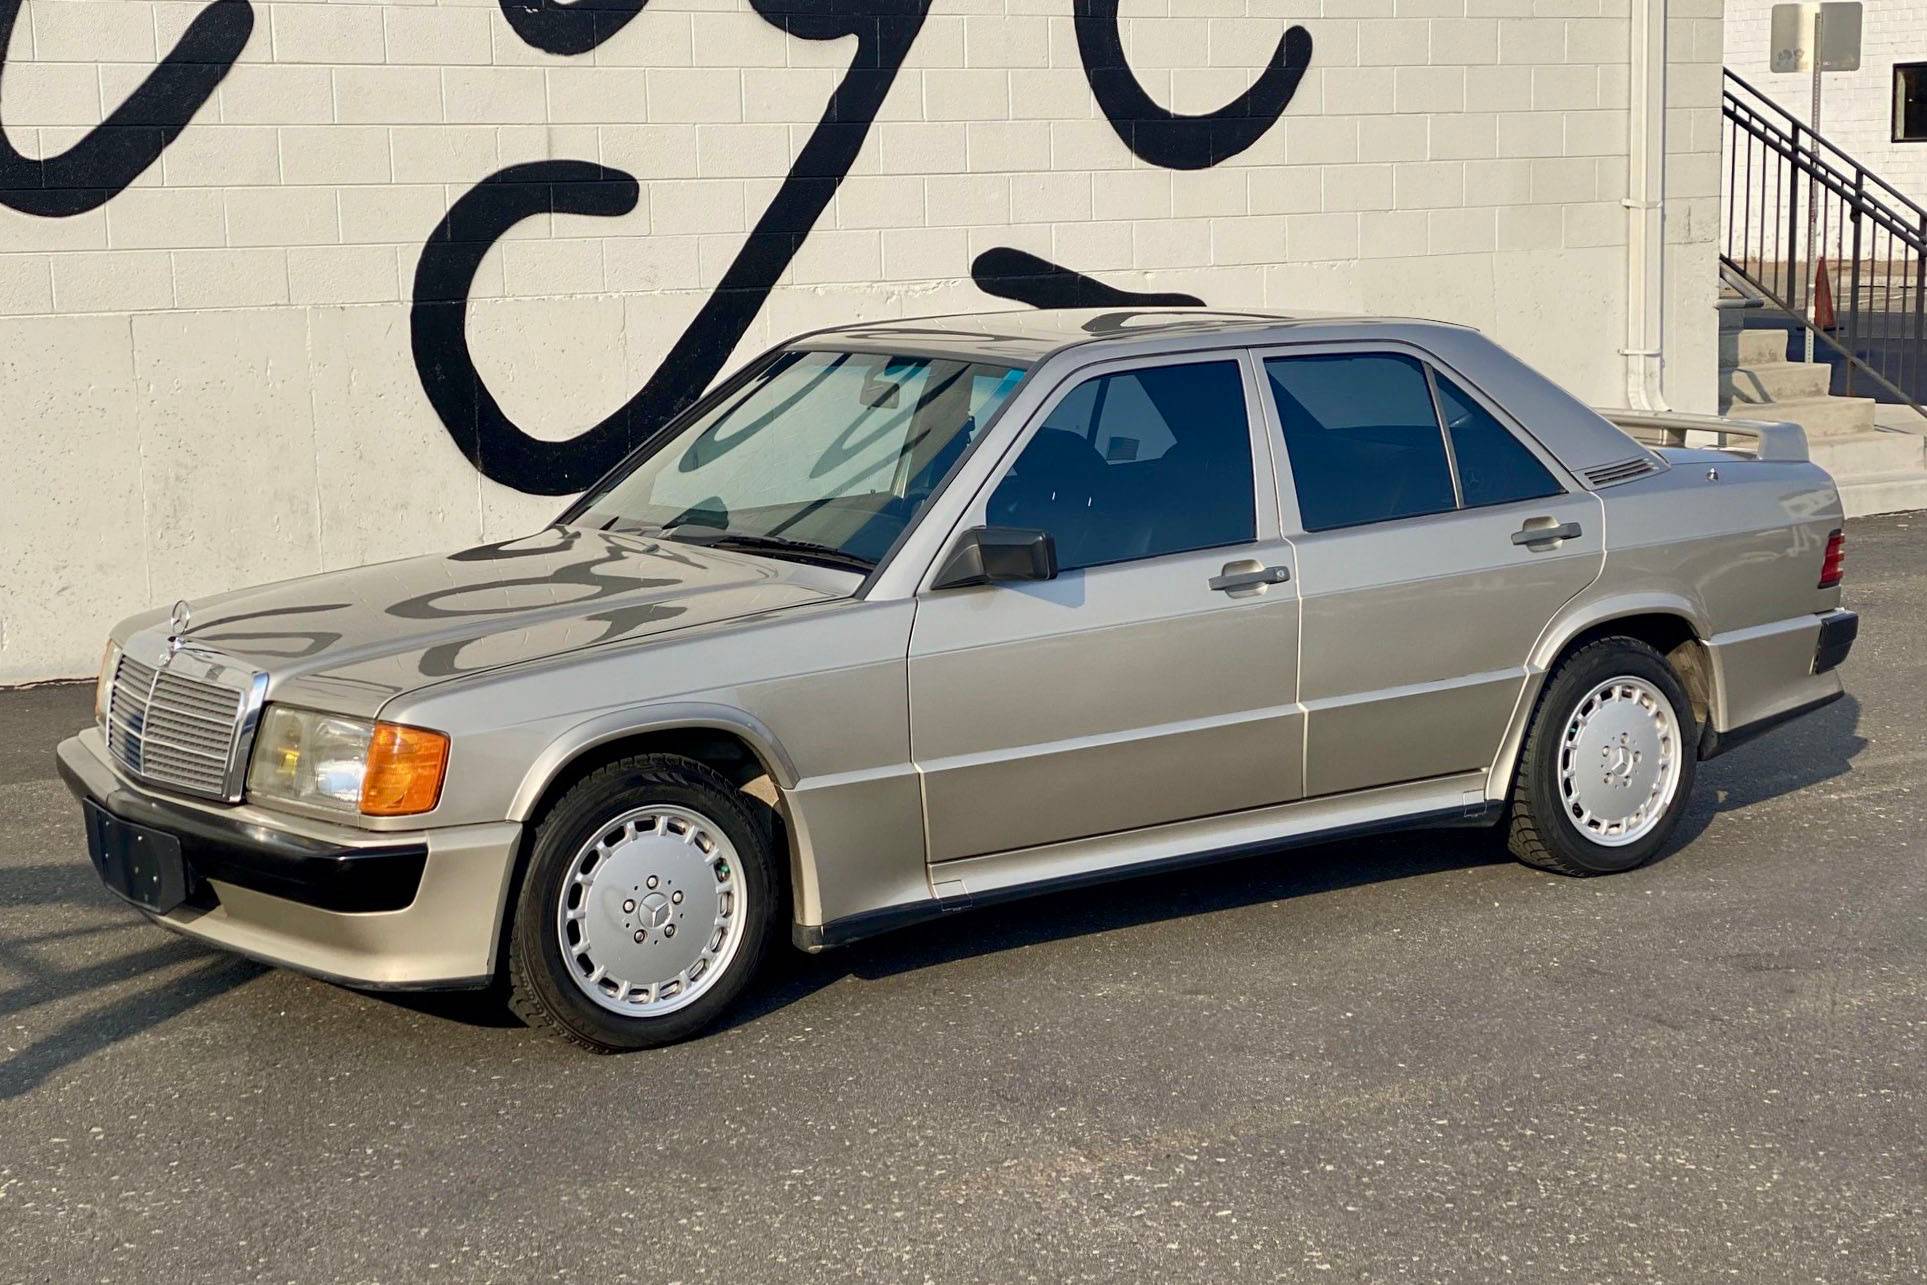 Here's Your Chance To Buy a Rare Mercedes-Benz 190 E Race Car